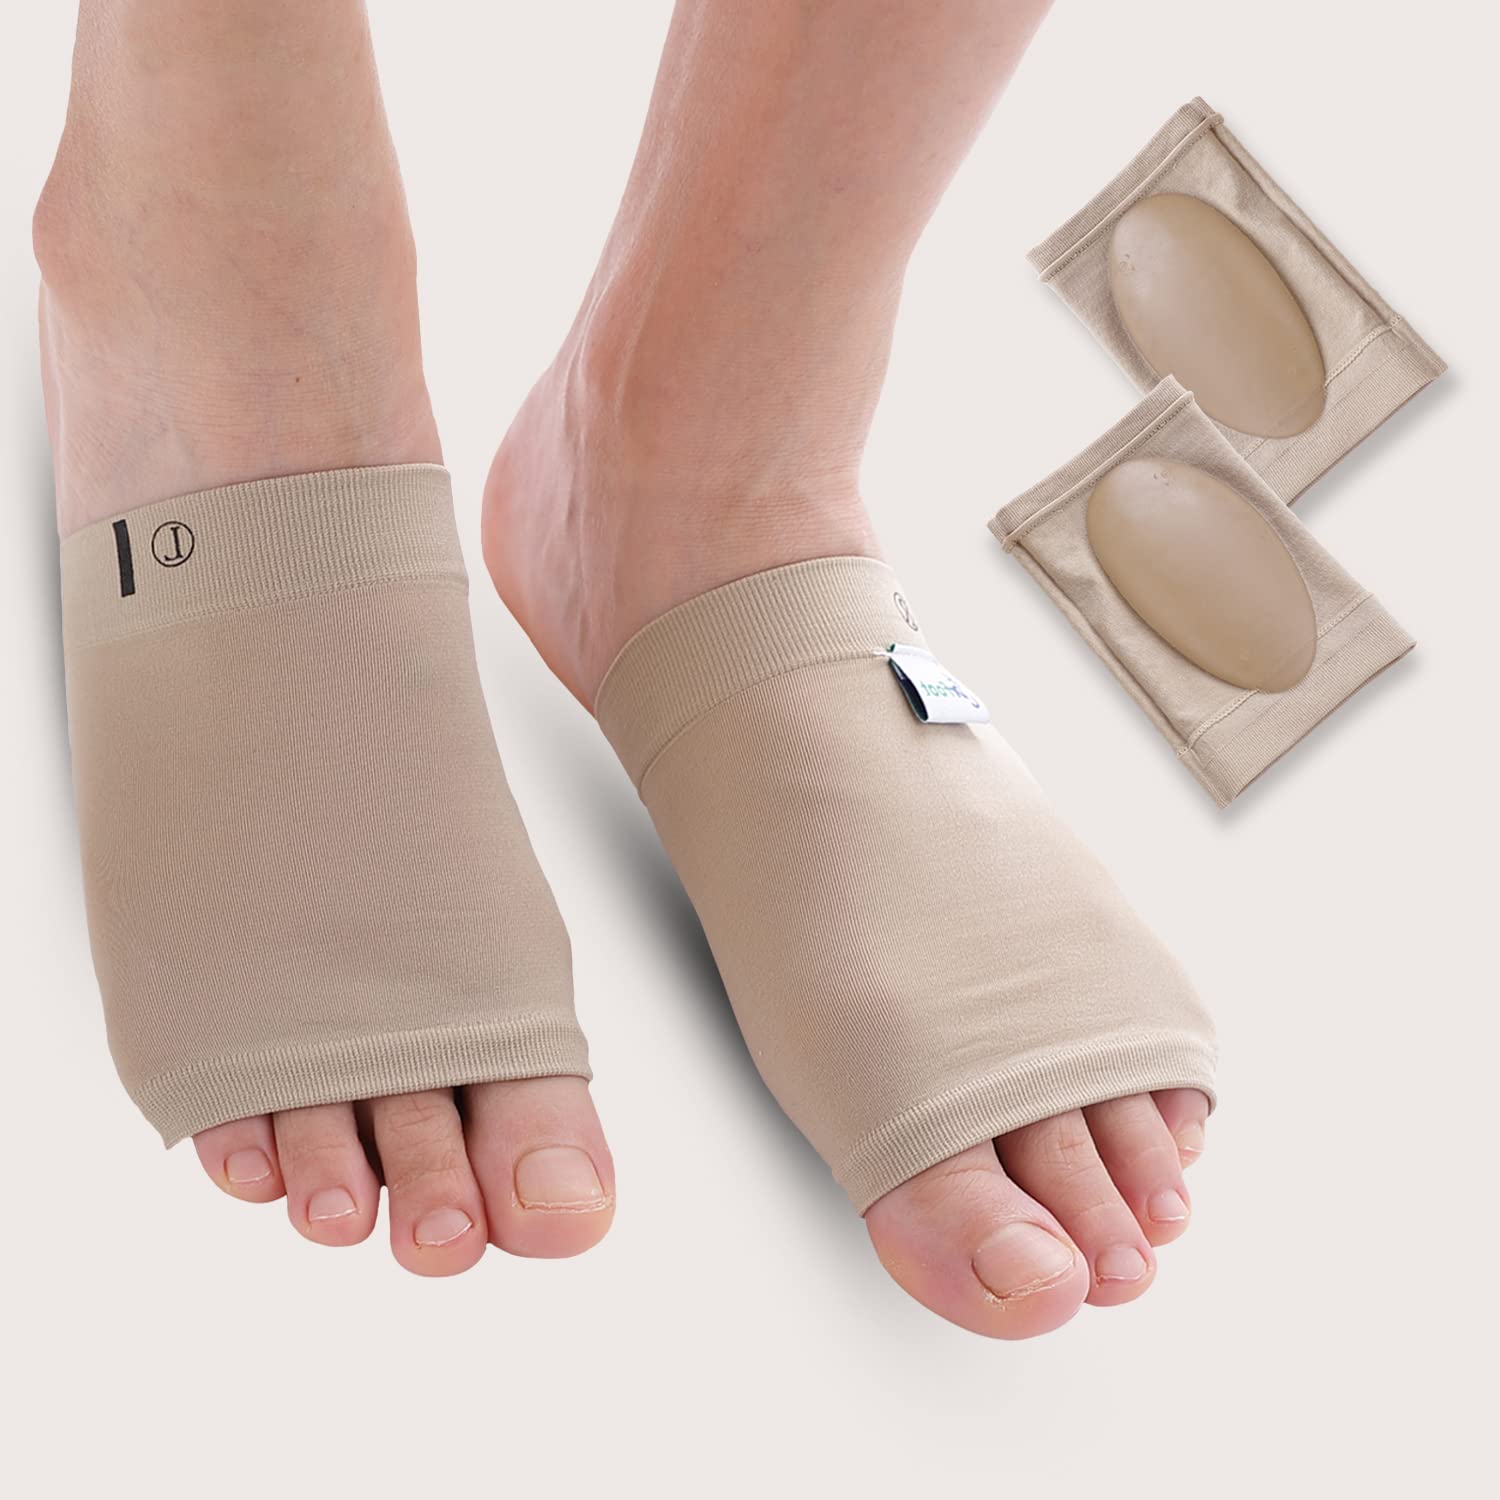 Dr Foot Arch Support Sleeve Cushion | For Plantar Fasciitis, Foot Pain, Muscle Relaxation, Fallen Arches | For Men & Women | Free Size With Beige Color -1 Pair (Pack of 10)